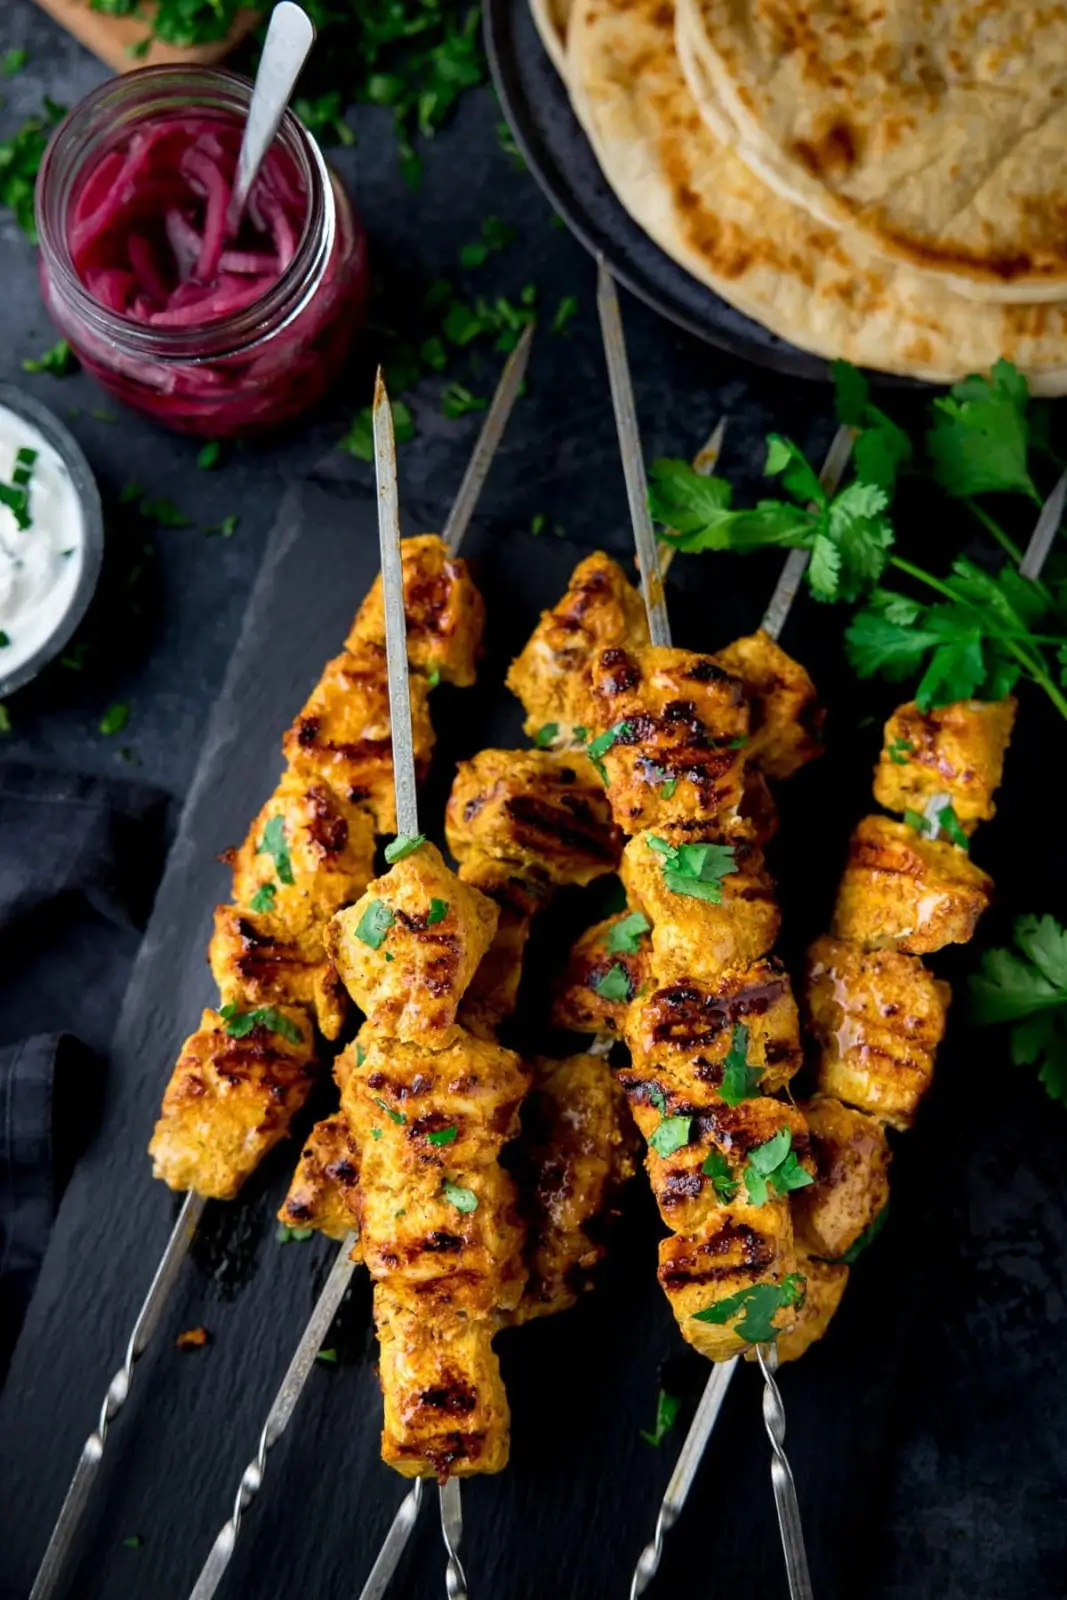 Spice Up Your Summer BBQ With These 5 Mouthwatering South Asian Recipes To Share With Family & Friends! - Tandoori Tikka Skewers. 